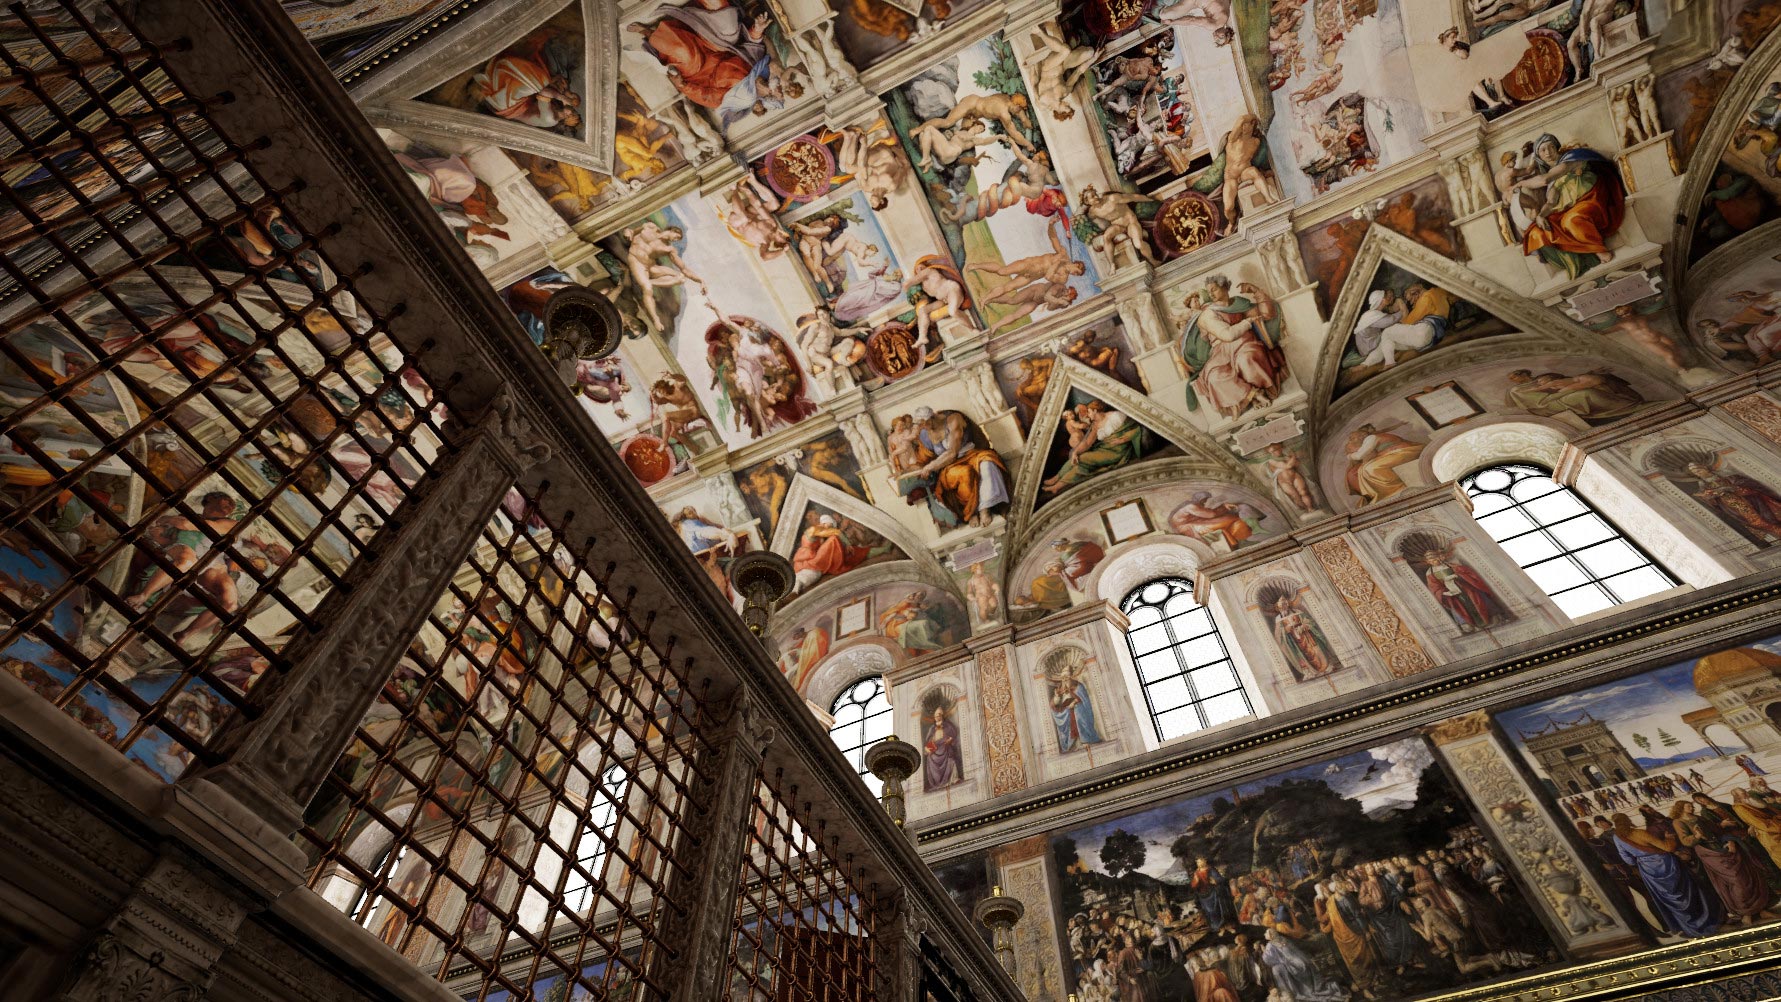 Vr Recreation Of The Sistine Chapel Is Now Available On Steam For Free